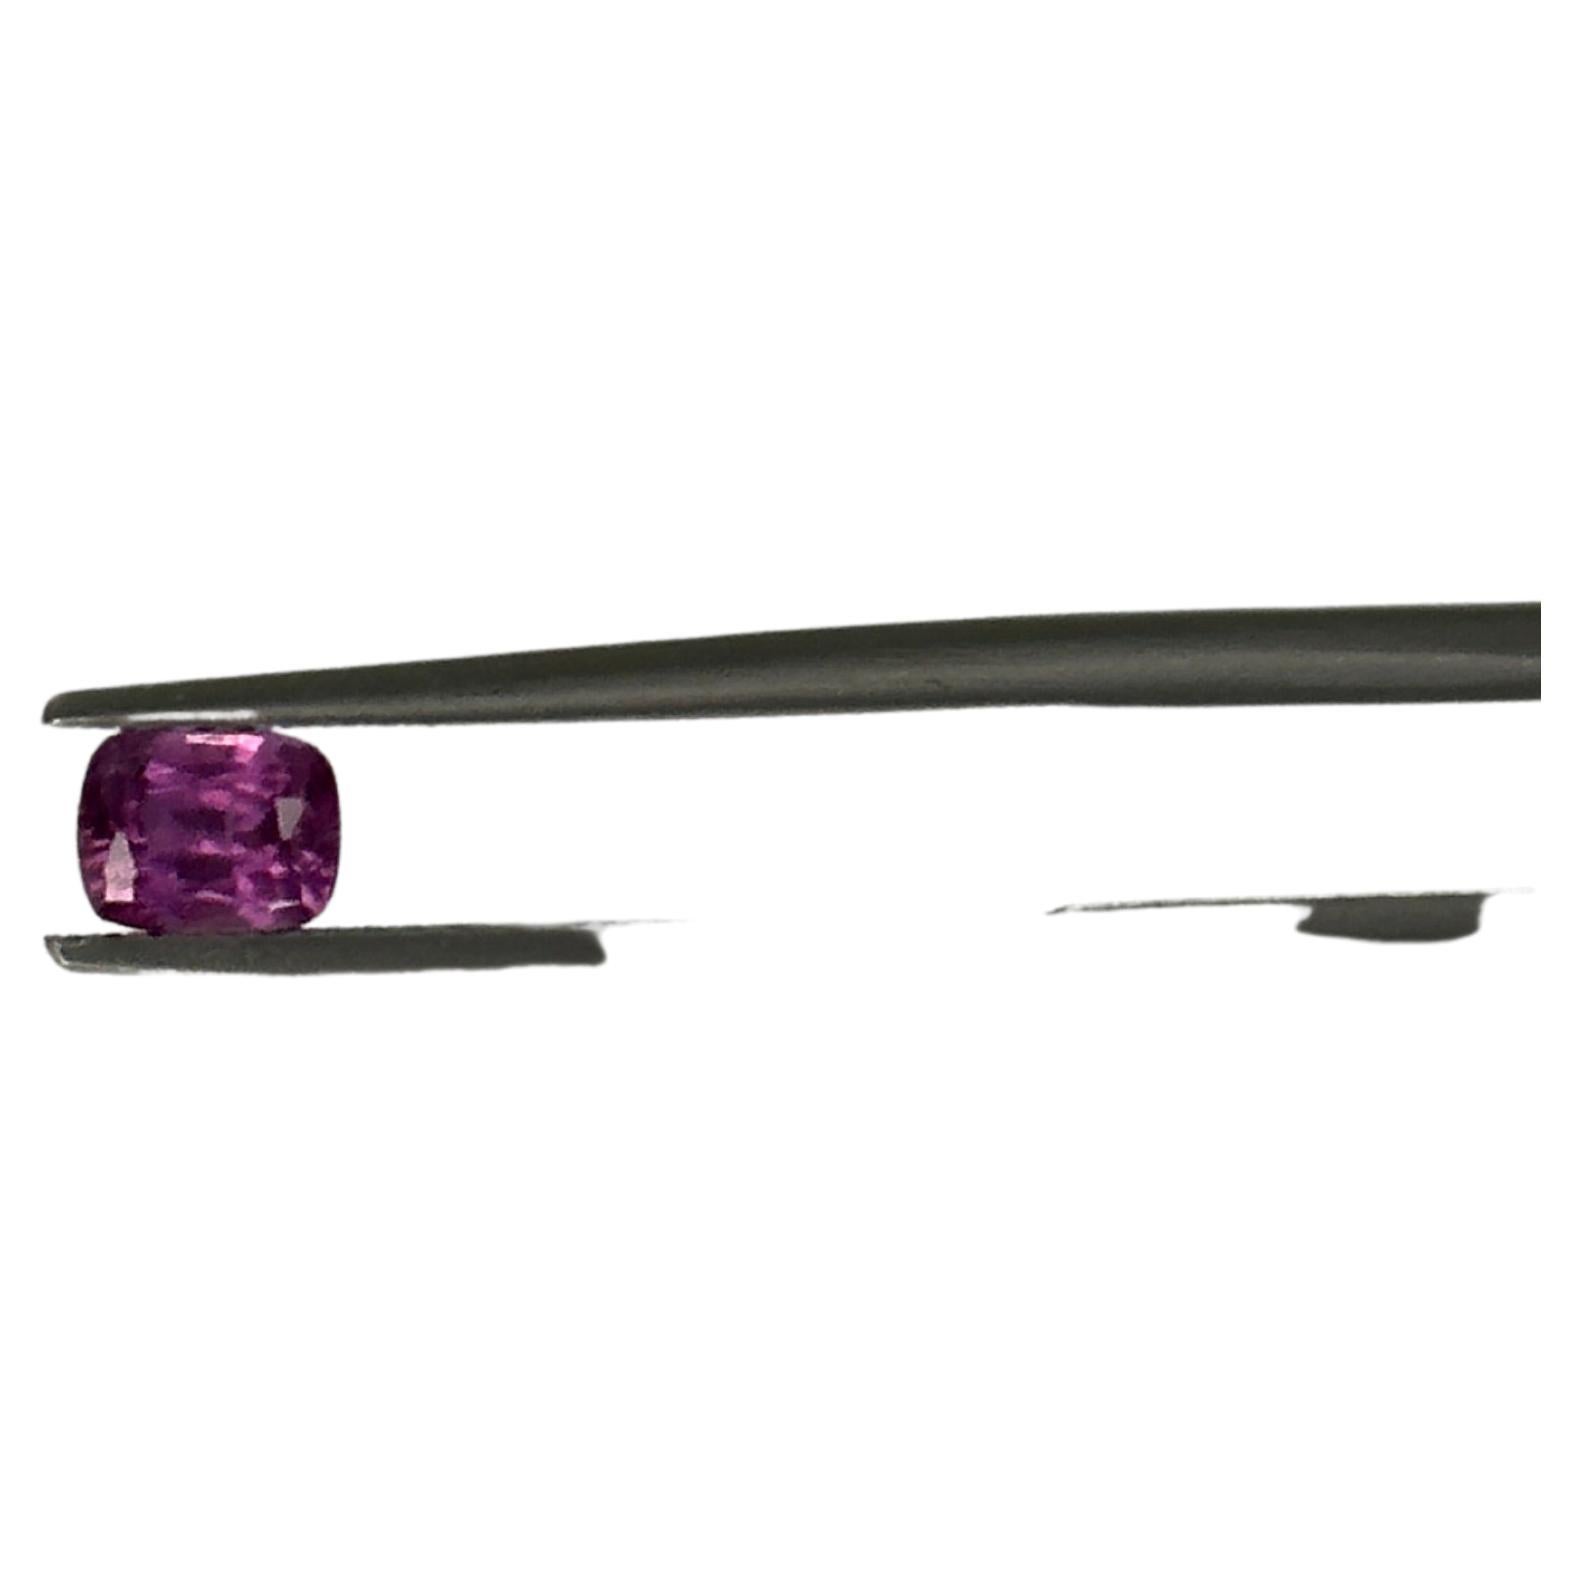 0.79 Carat Natural Fancy Pink Sapphire For Sale